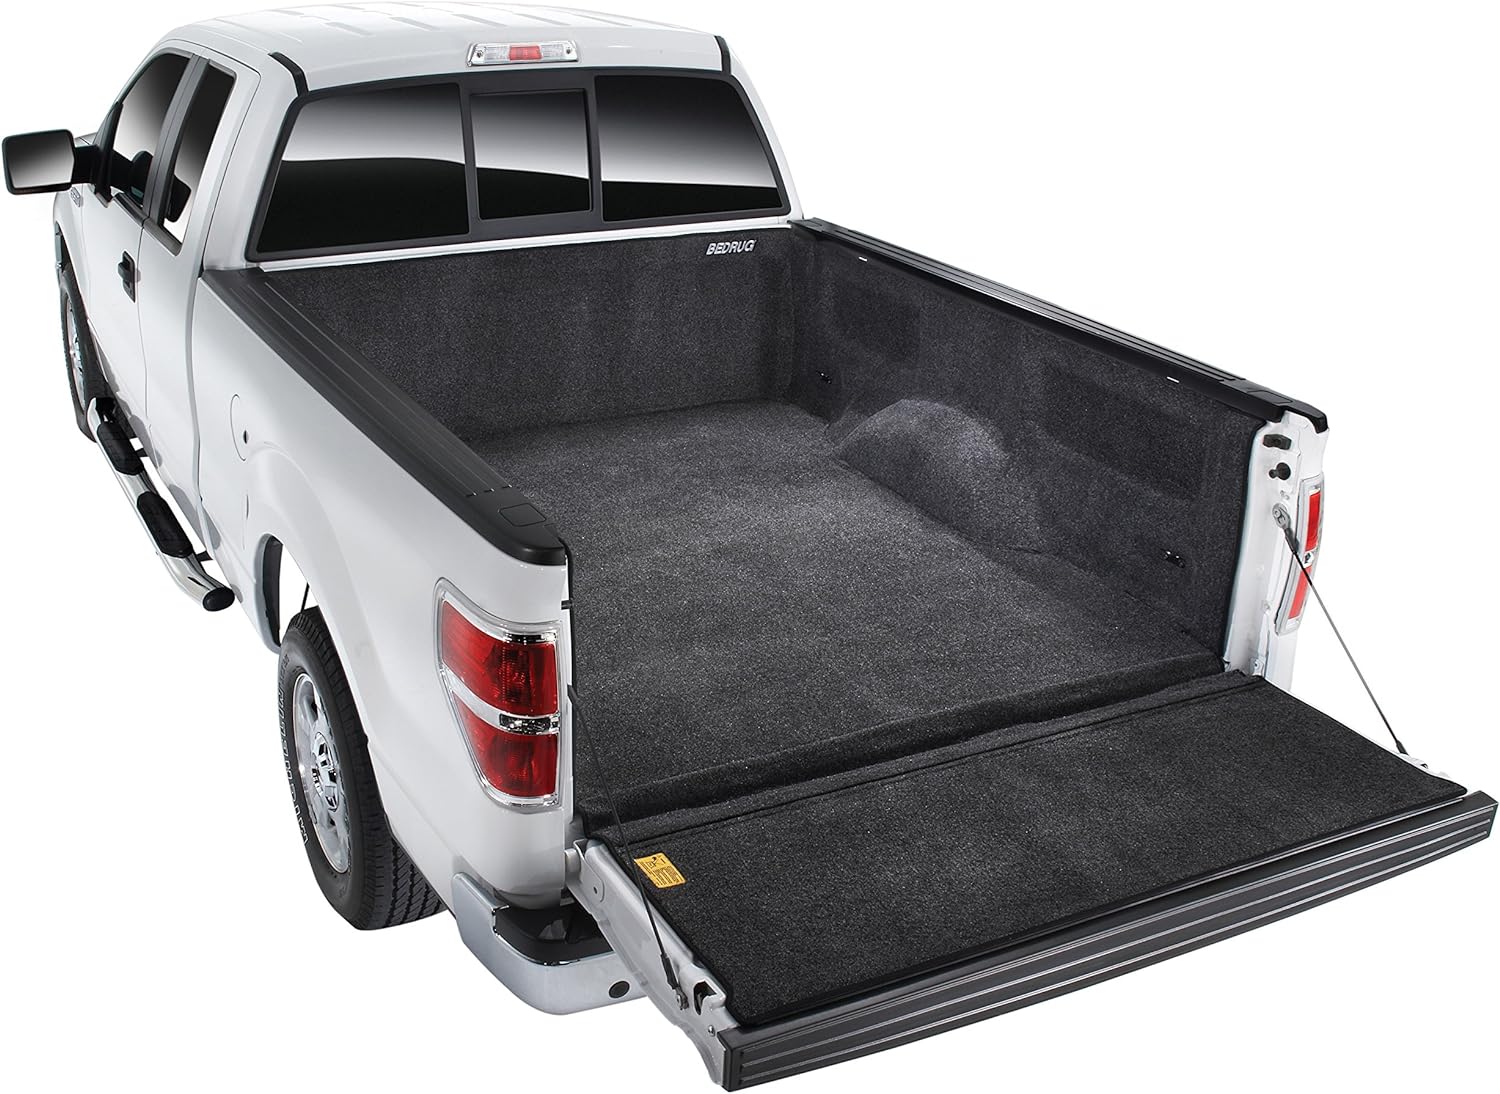 I bought this product right from amazon. I would definitely double check with the main website on the fitting charts because it's very easy to mistake a different model trucks liner for your own.First off. This liner is sweet. My friends dad has had it for 6 years now and switched it from a Sierra to a Silverado and it fit just fine. It's soft on the feet, yet rough enough for most any of your hauling needs. I am going to mainly use it for drive in theaters and camping, for now. I already hauled